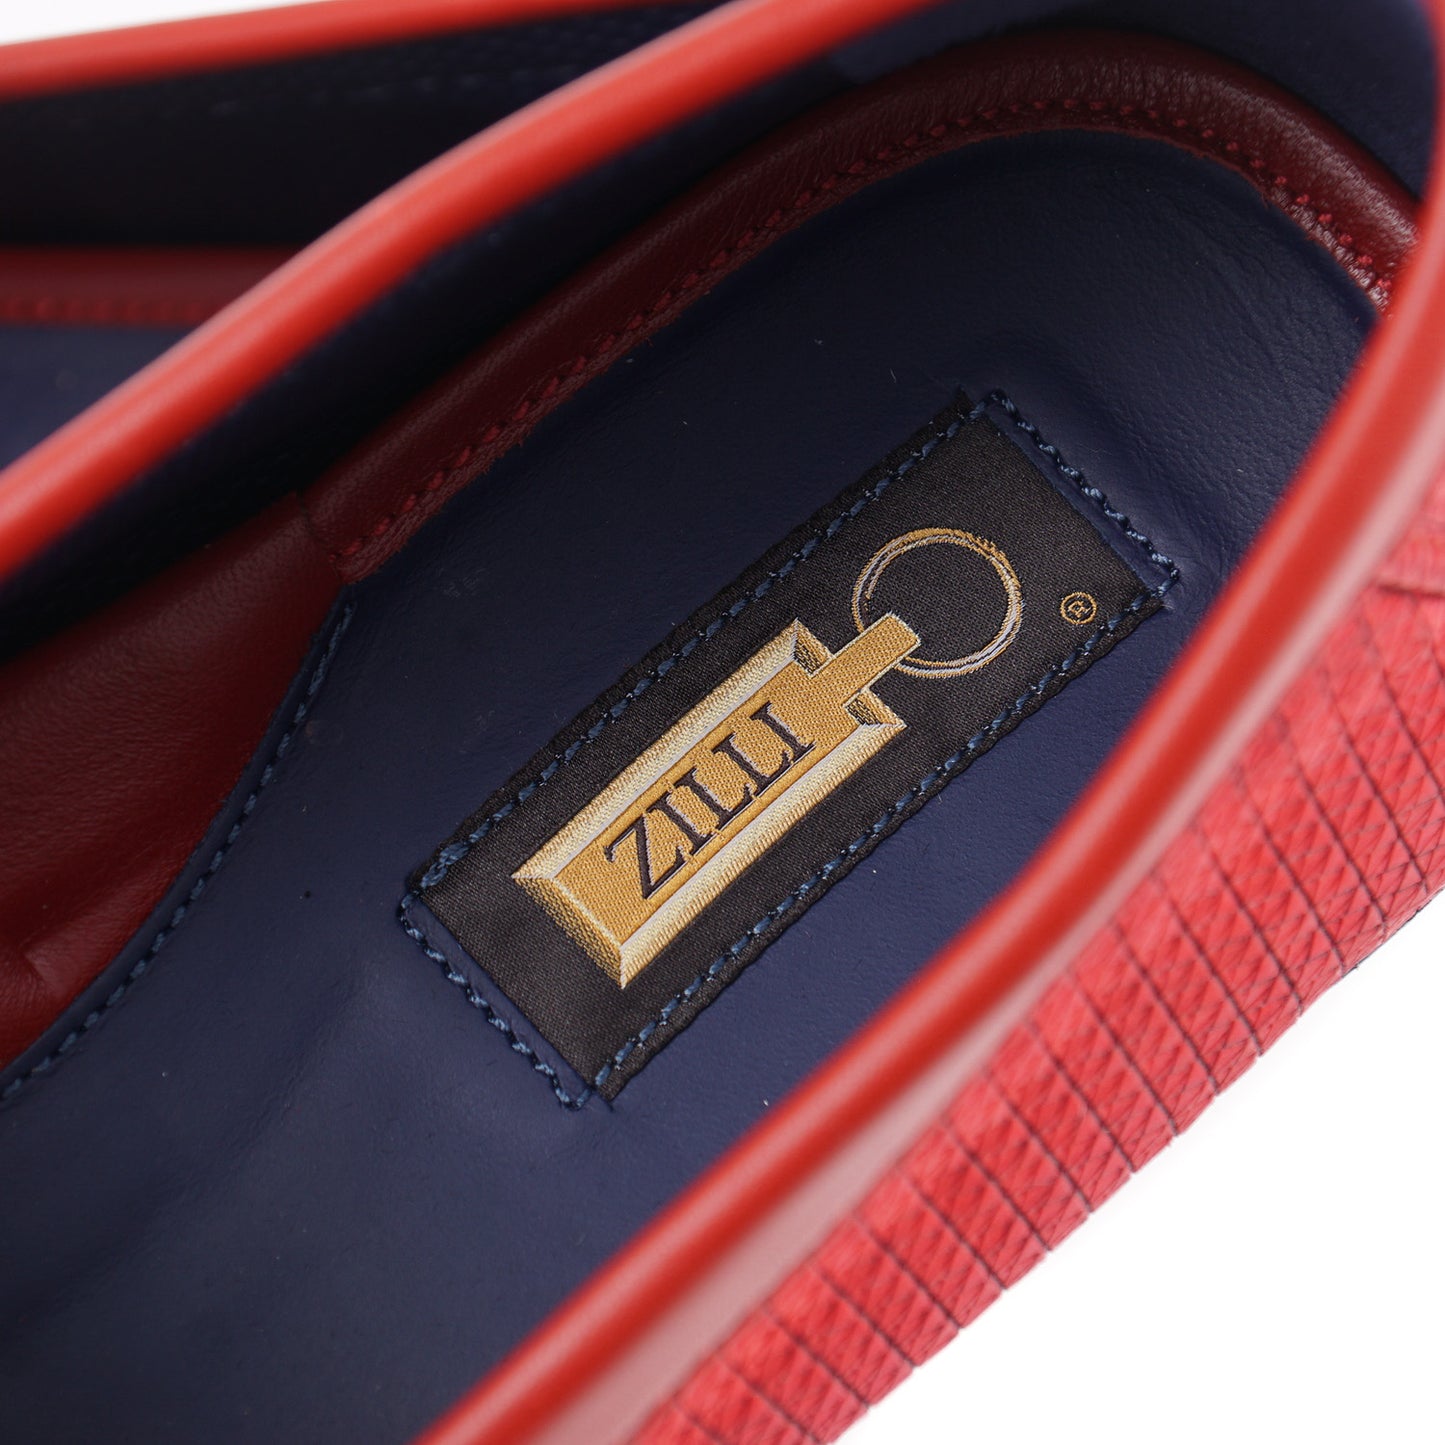 Zilli Patterned Leather Driving Loafers - Top Shelf Apparel